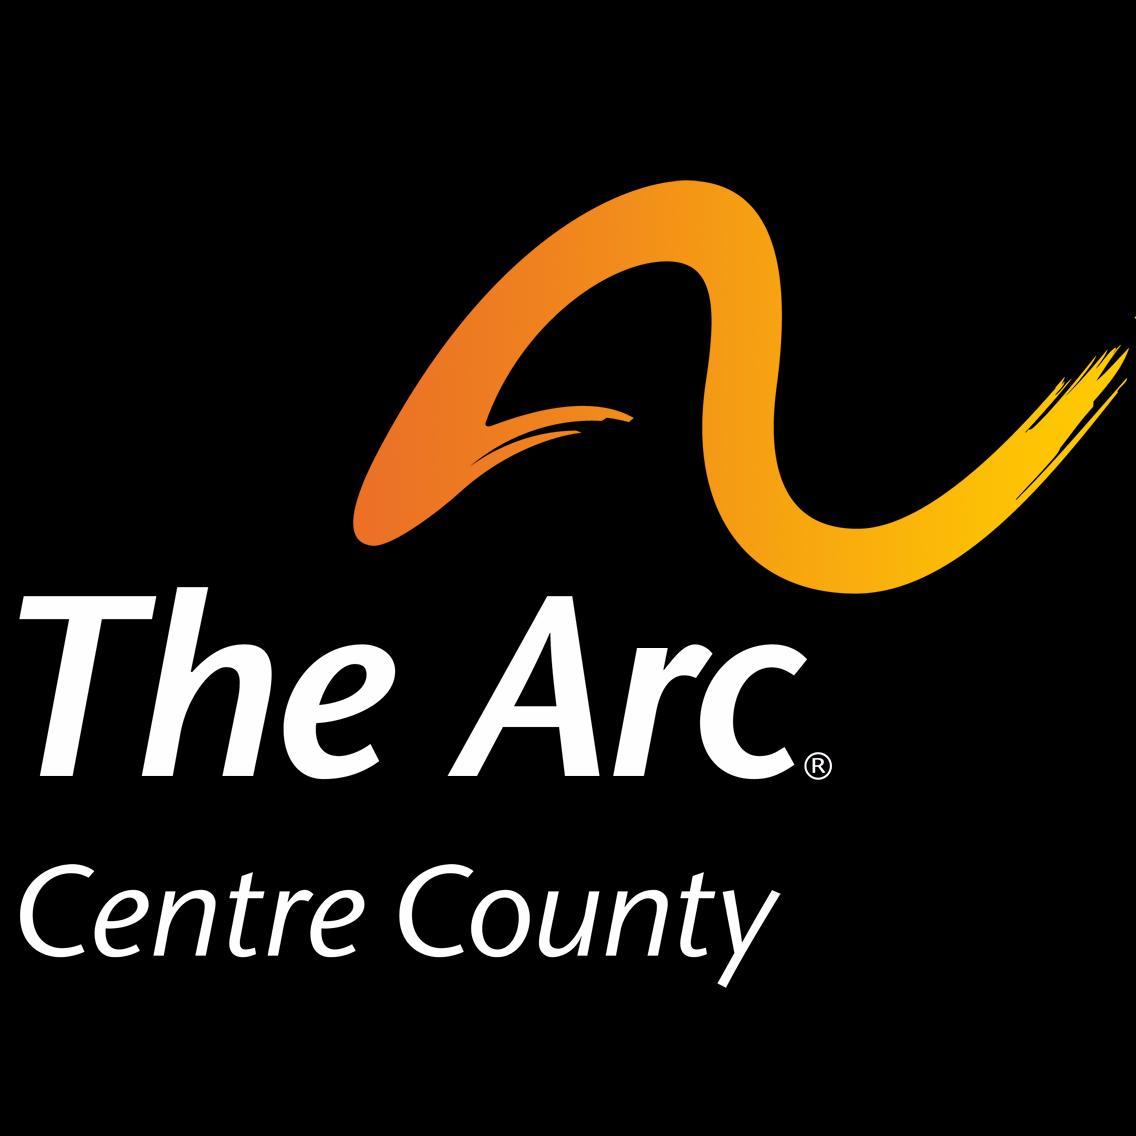 The Arc is a non-profit agency advocacy and service provider organization dedicated to improving the lives of persons with  developmental disabilities.